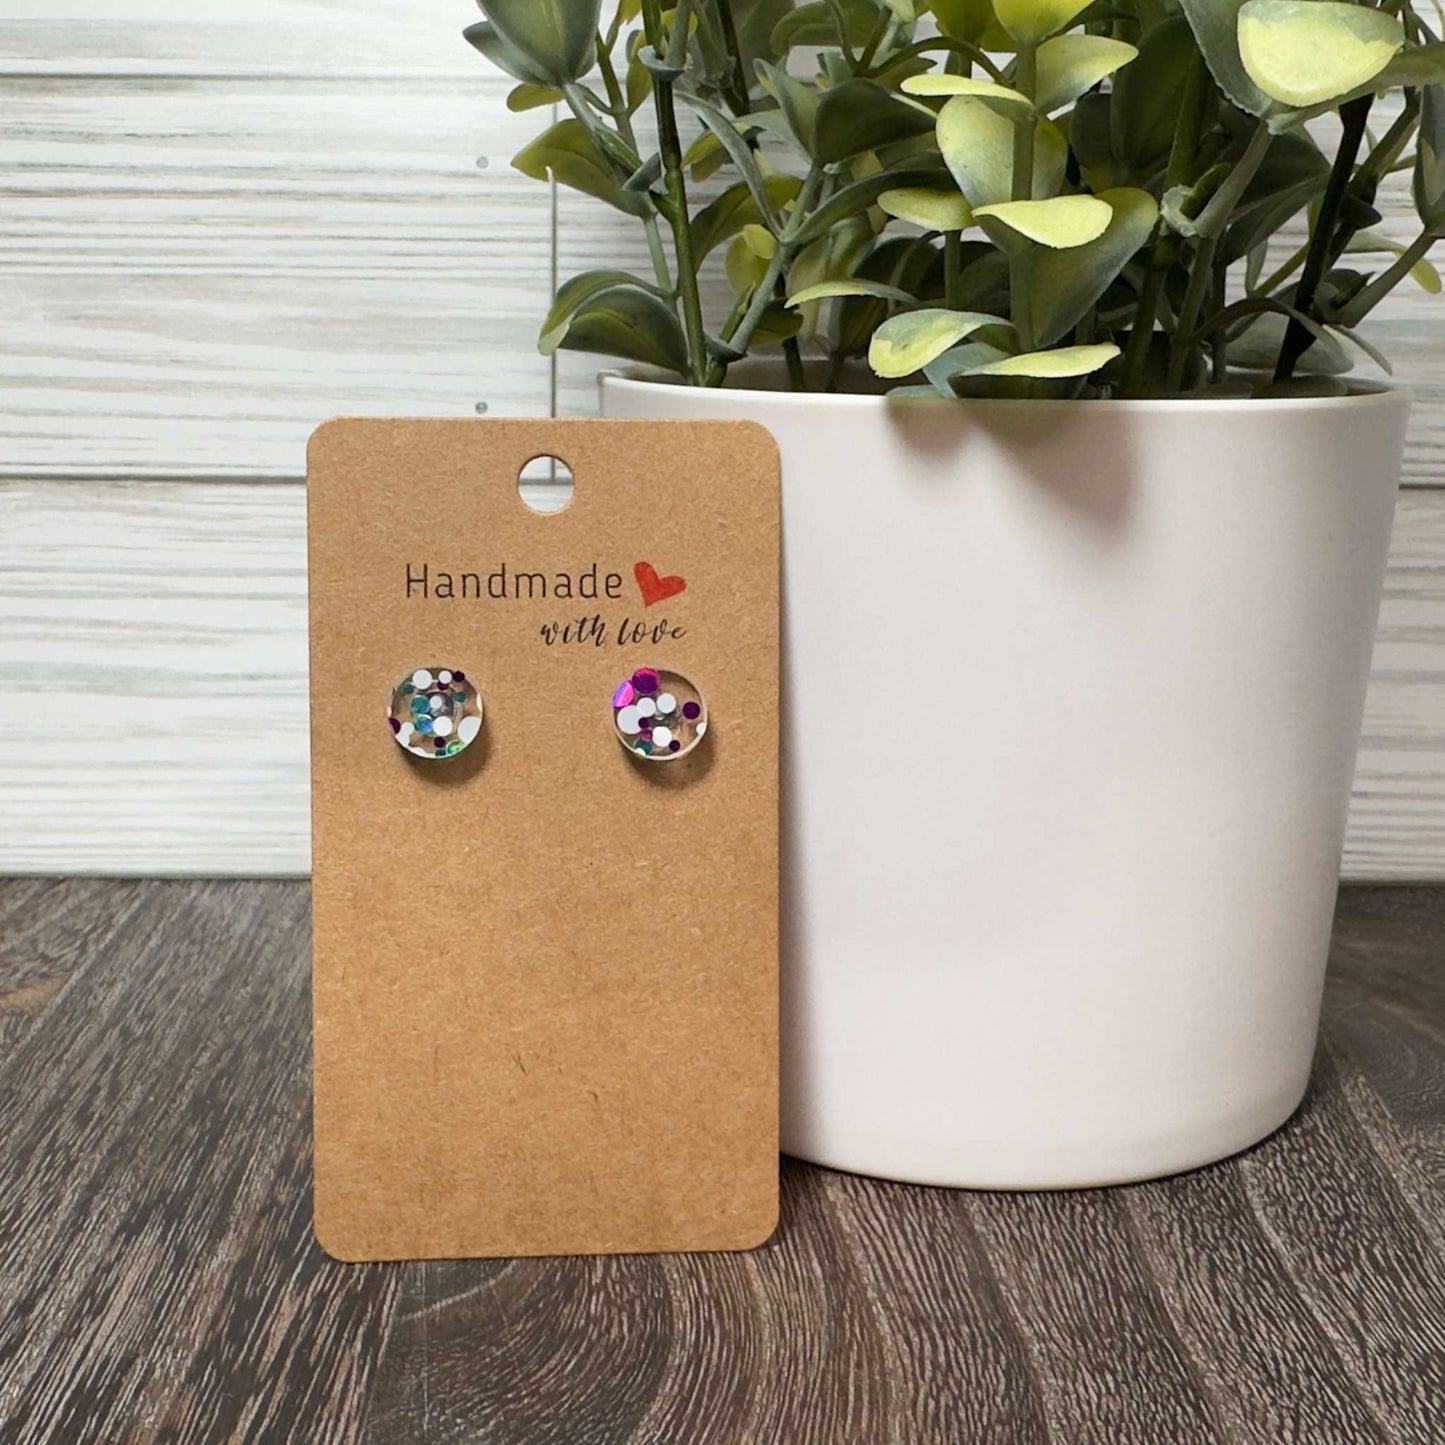 Mermaid Glitter Purple and Turquoise Button Stud Statement Earrings